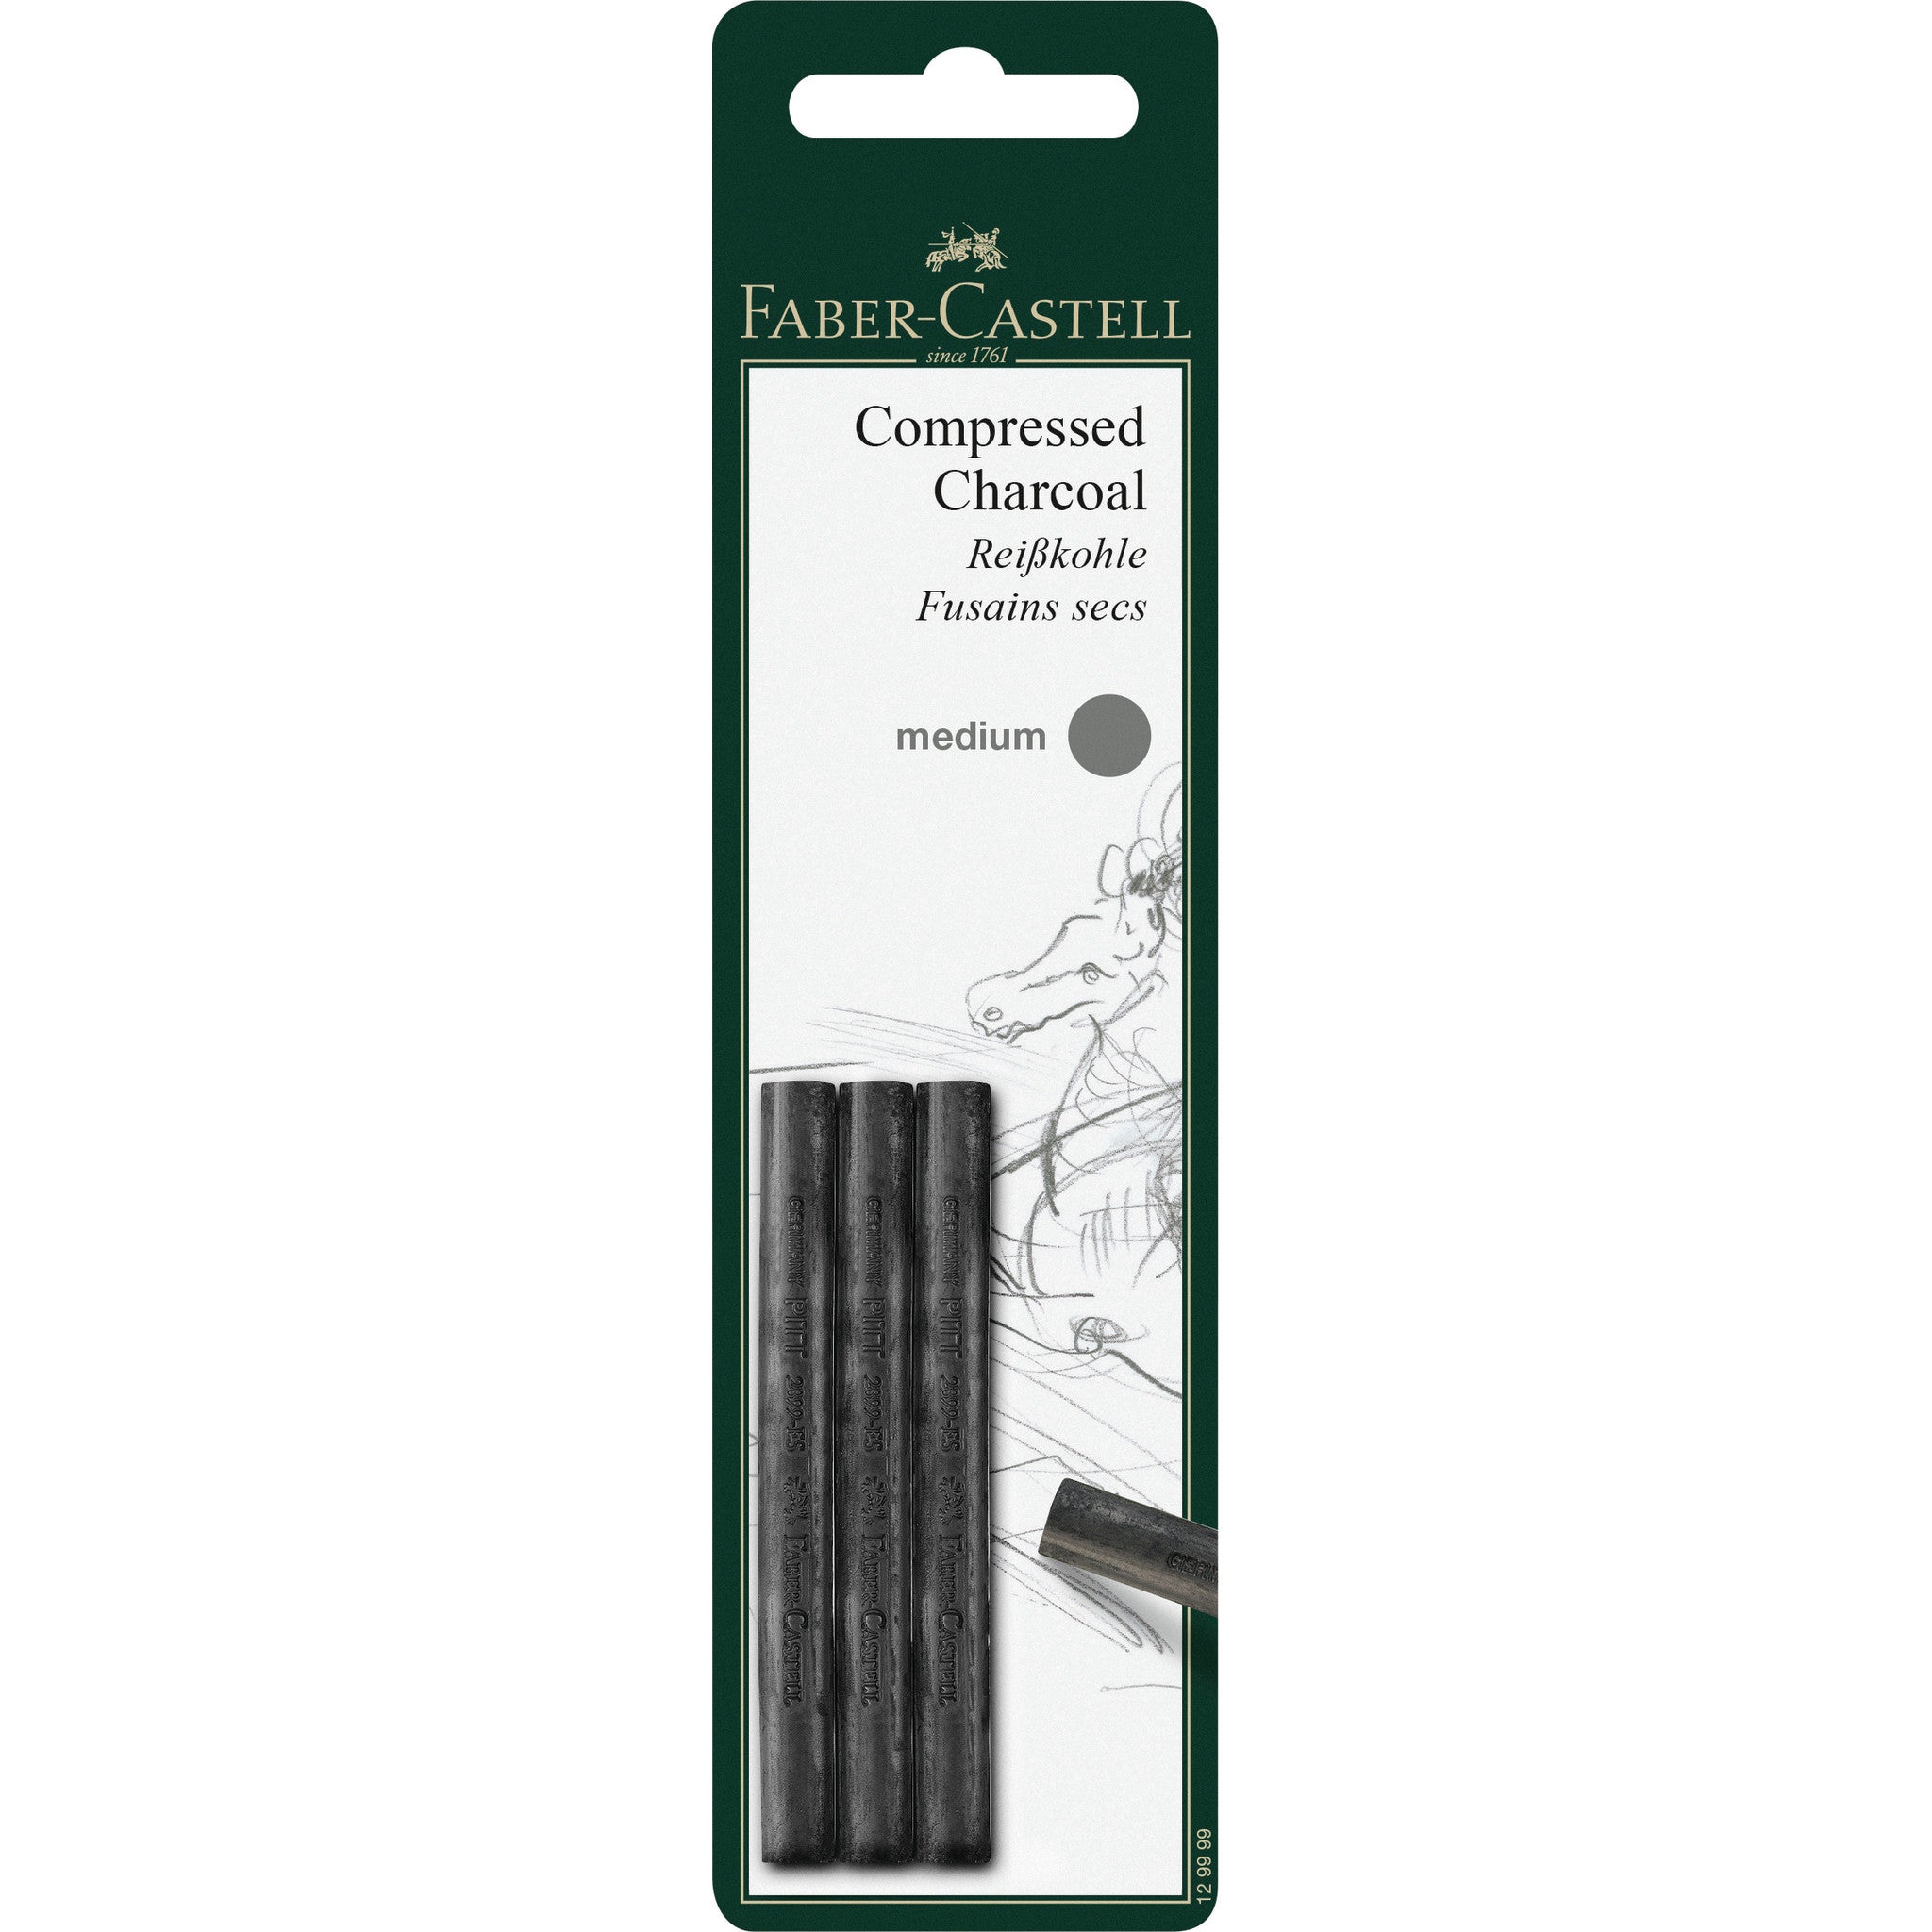 General's Compressed Charcoal - arts & crafts - by owner - sale